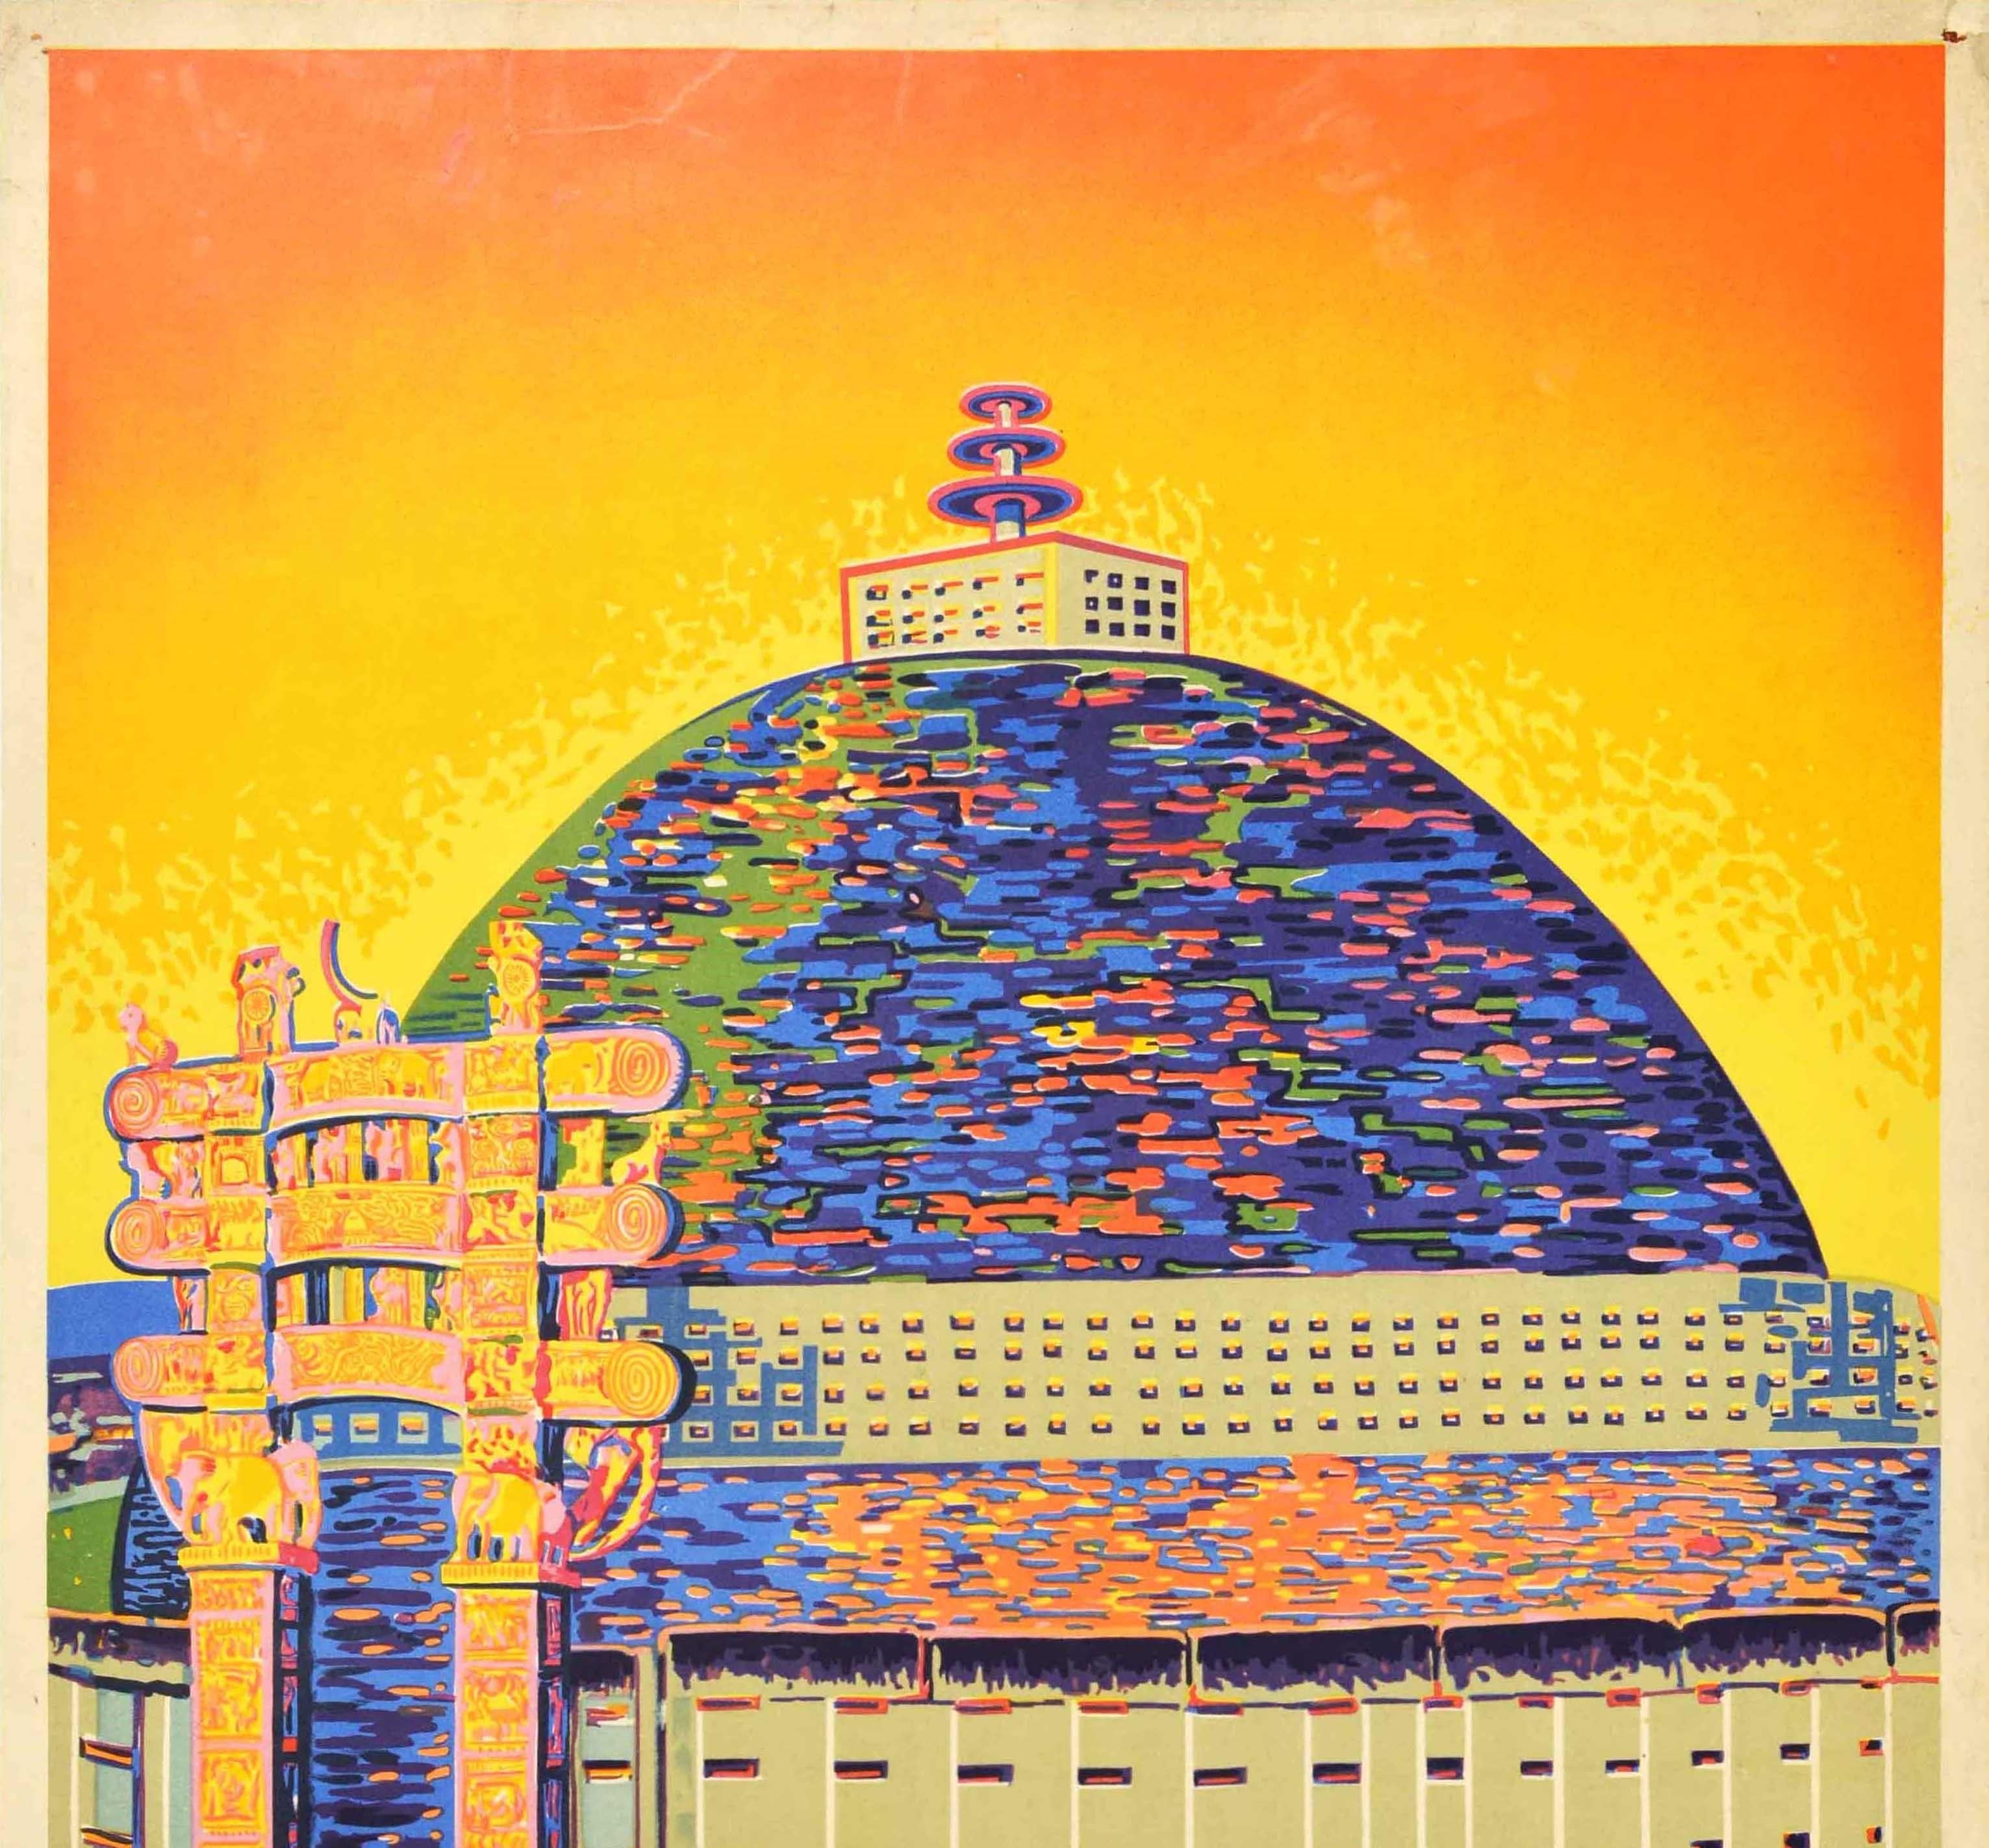 Original Vintage Poster For Sanchi Visit India Architecture Great Stupa Buddhism - Print by Unknown